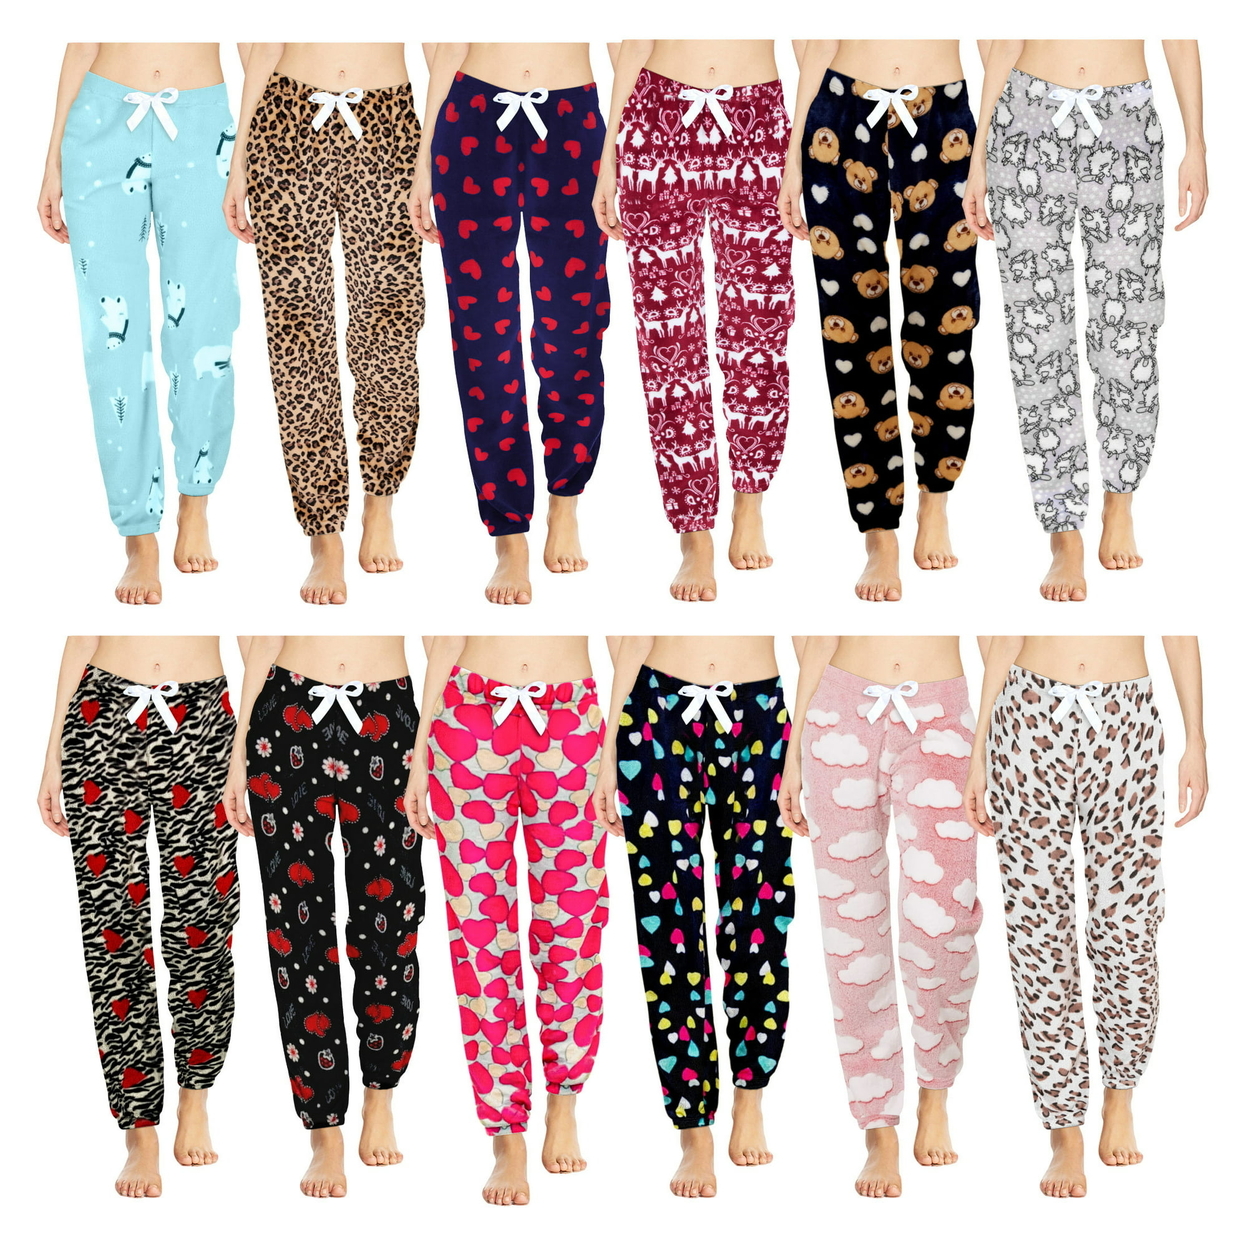 3-Pack: Women's Printed Ultra-Soft Comfy Stretch Micro-Fleece Pajama Lounge Pants - Large, Shapes